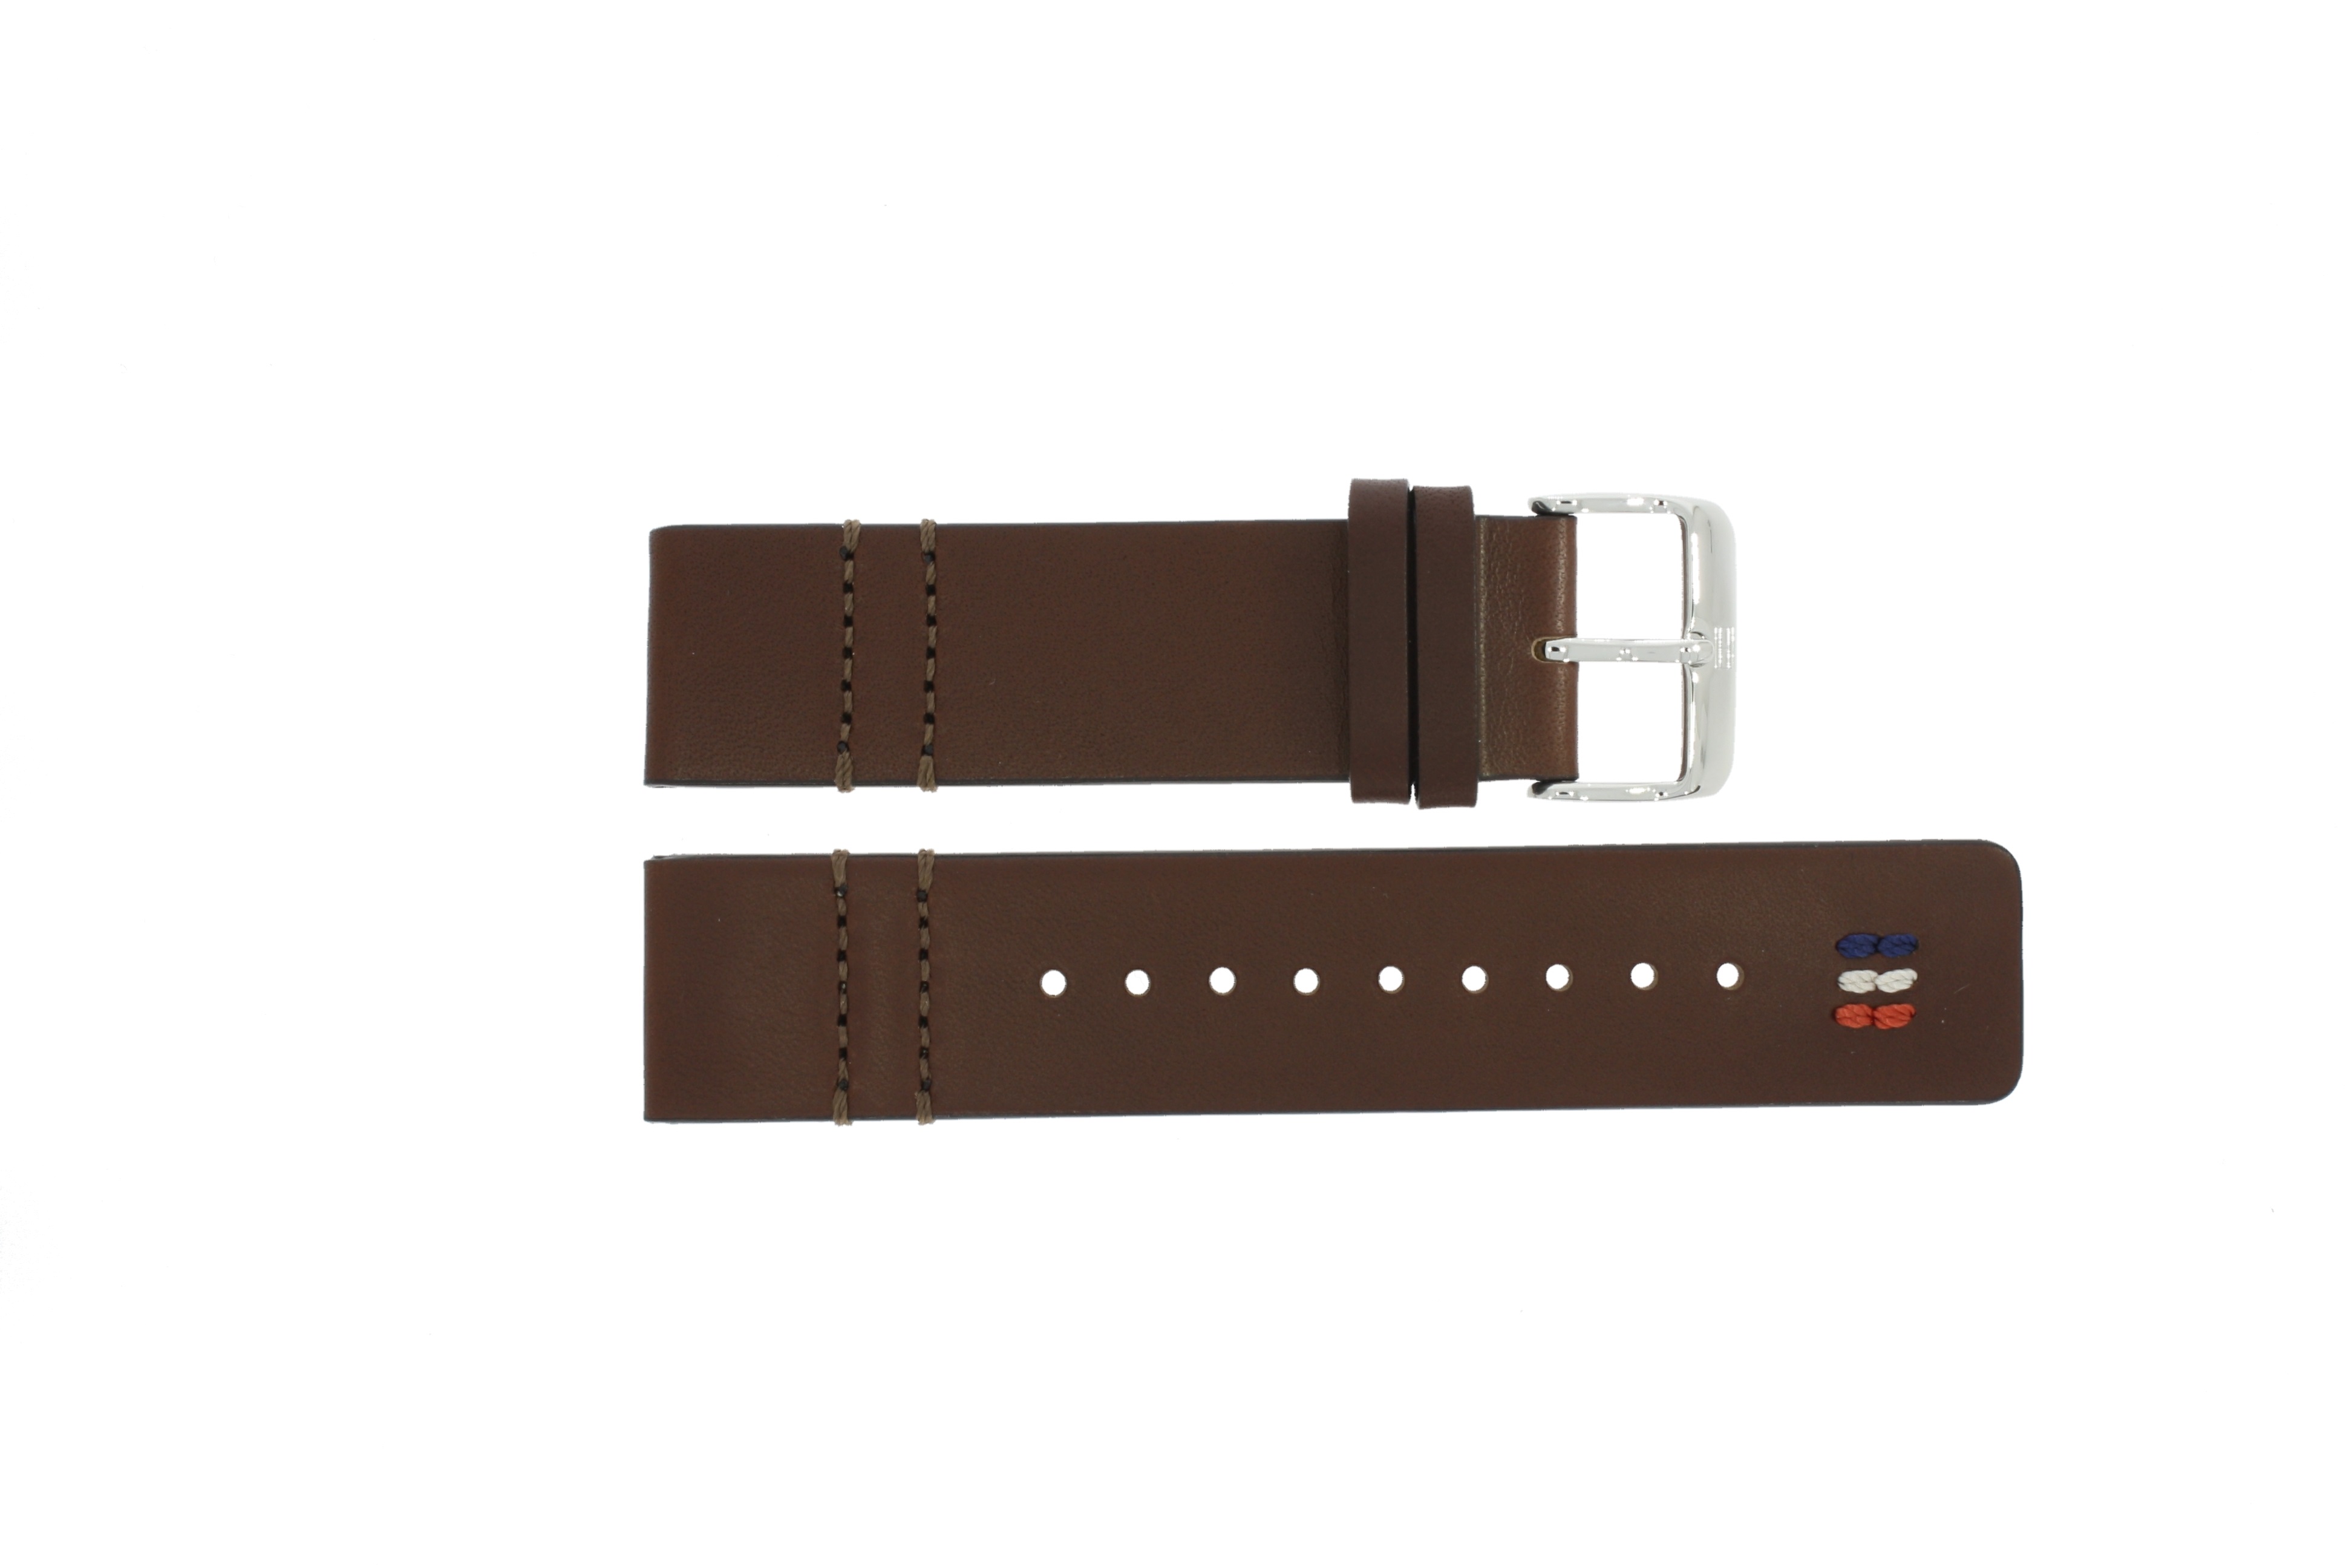 valg indeks Porto Watch band Tommy Hilfiger TH-281-1-14-1930 / TH679301887 Leather 22mm